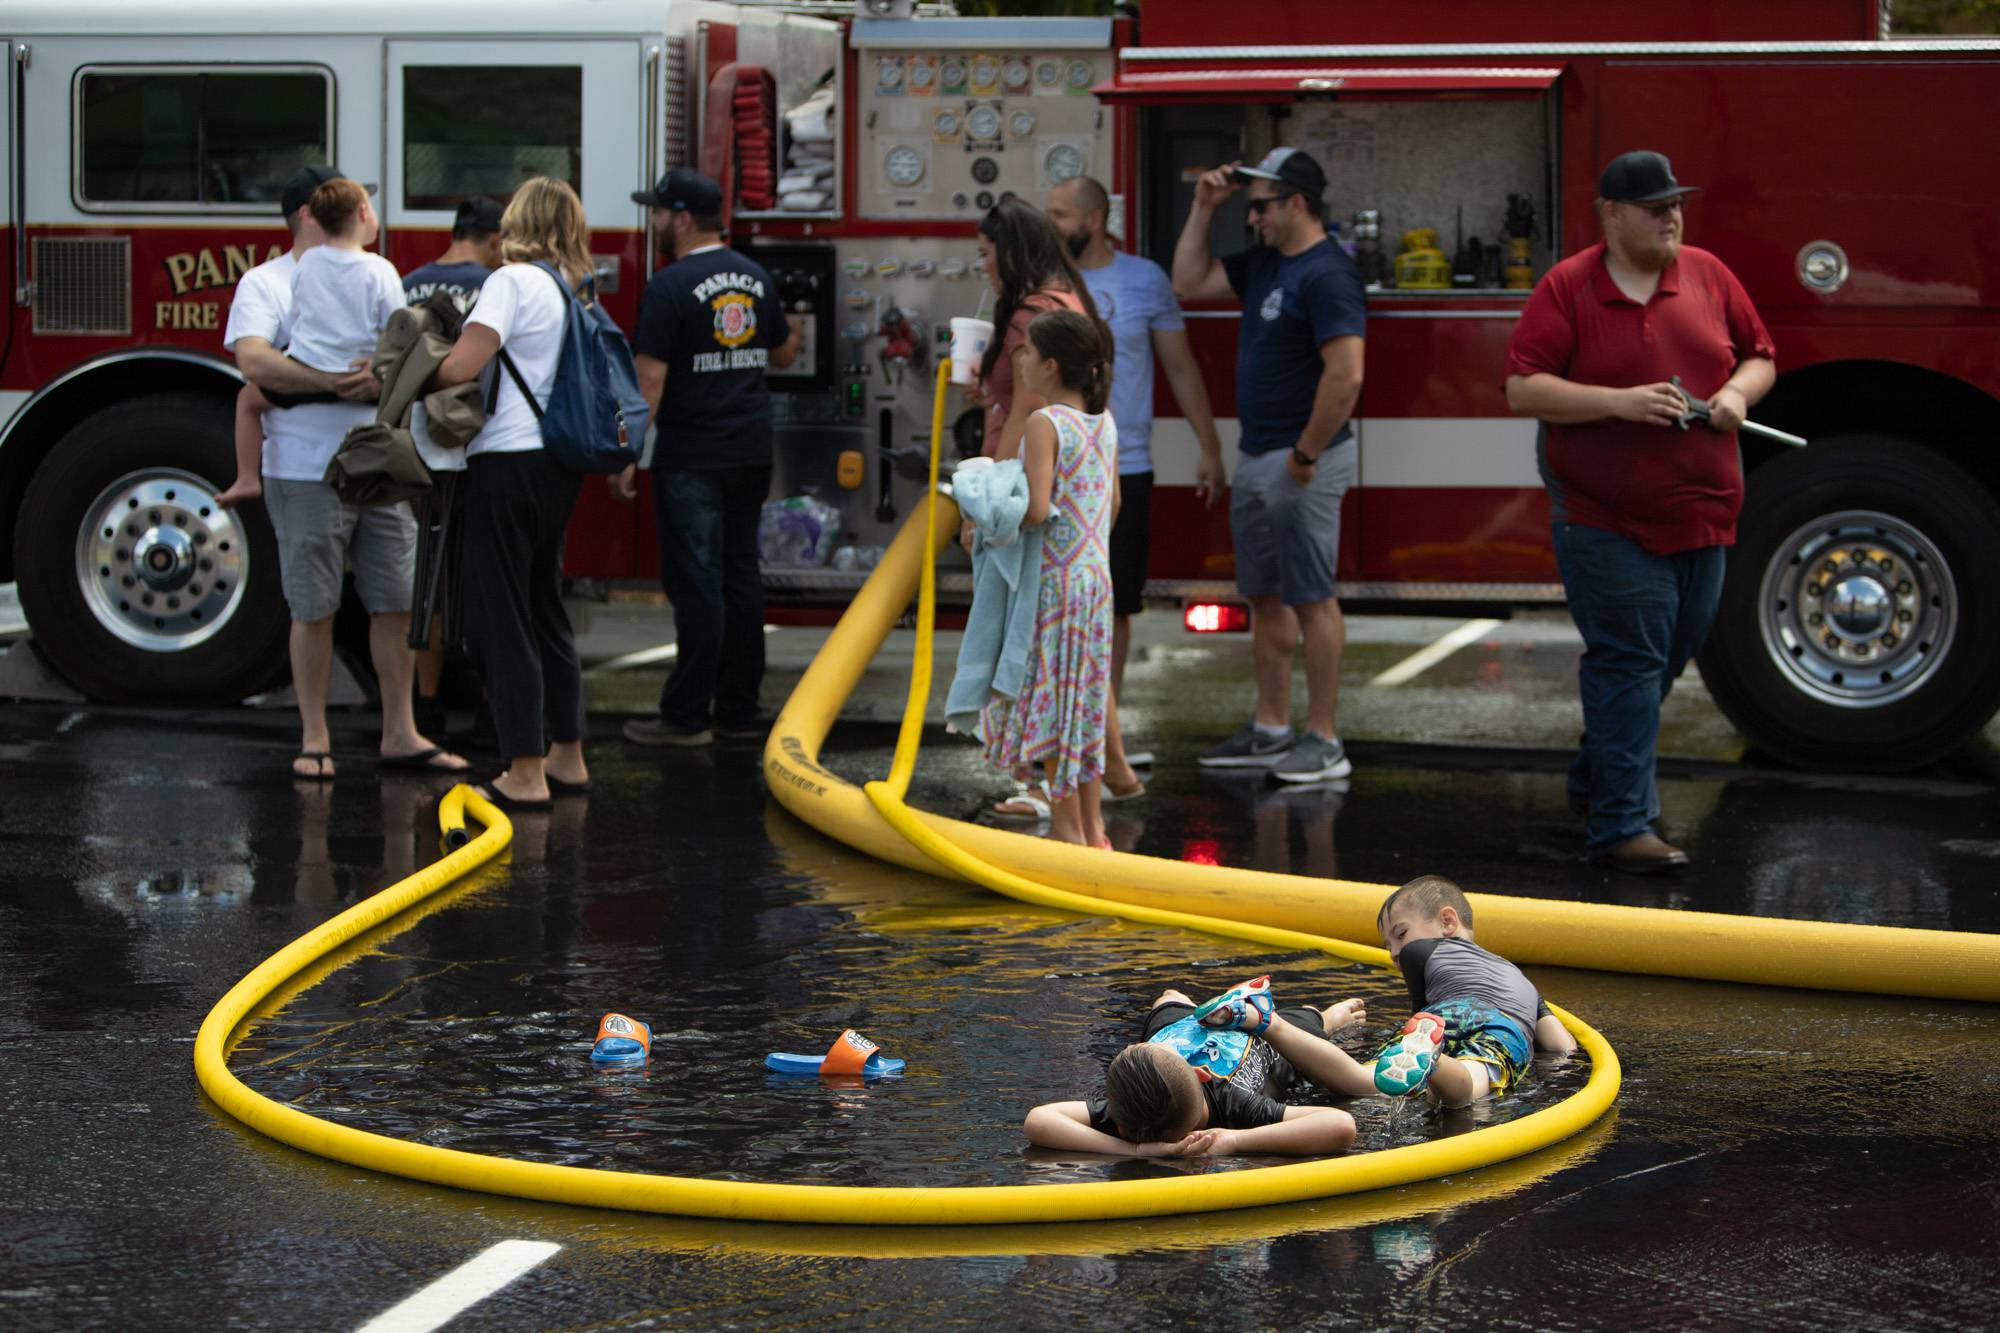 Boys relax in a fire hose pool after the Money Scramble on Saturday, July 23, 2022, in the Lincoln County High School parking lot in Panaca, Nevada.